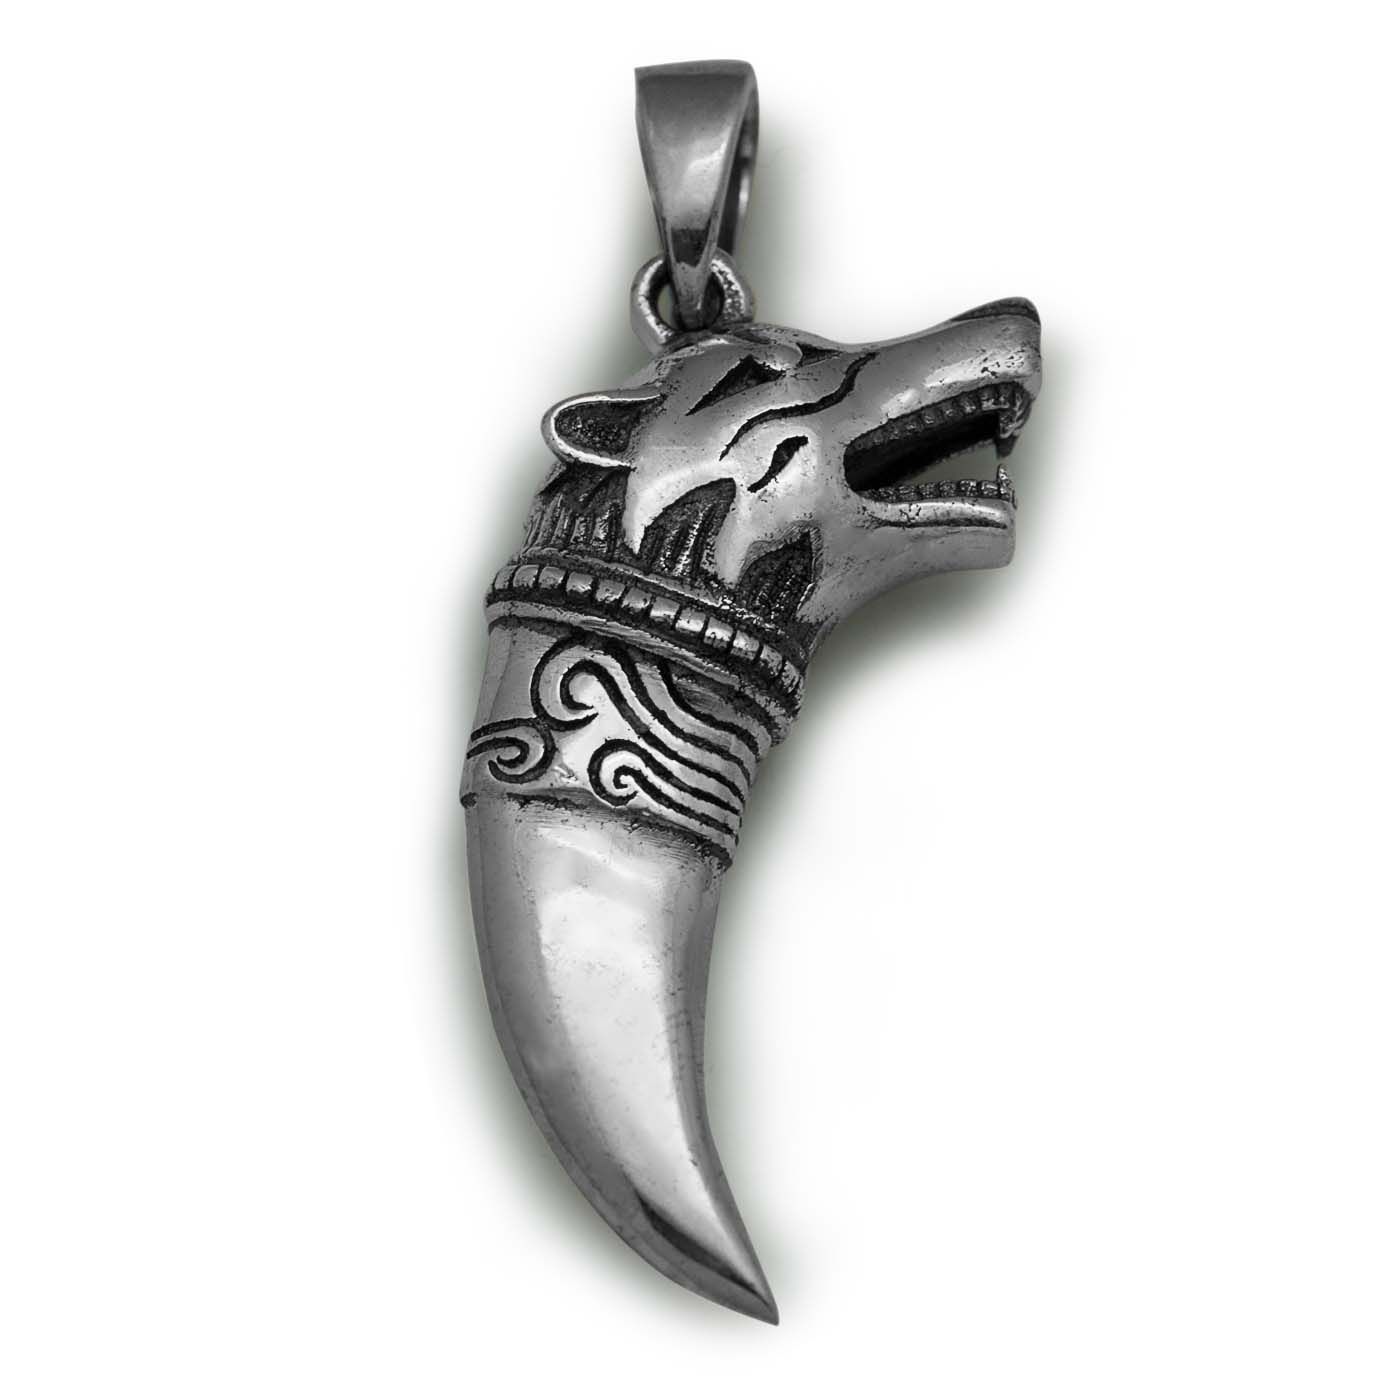 Unique 925 sterling silver men's jewellery, wonderful masculine and dominant jewellery. With a robust look that symbolizes strength and power.